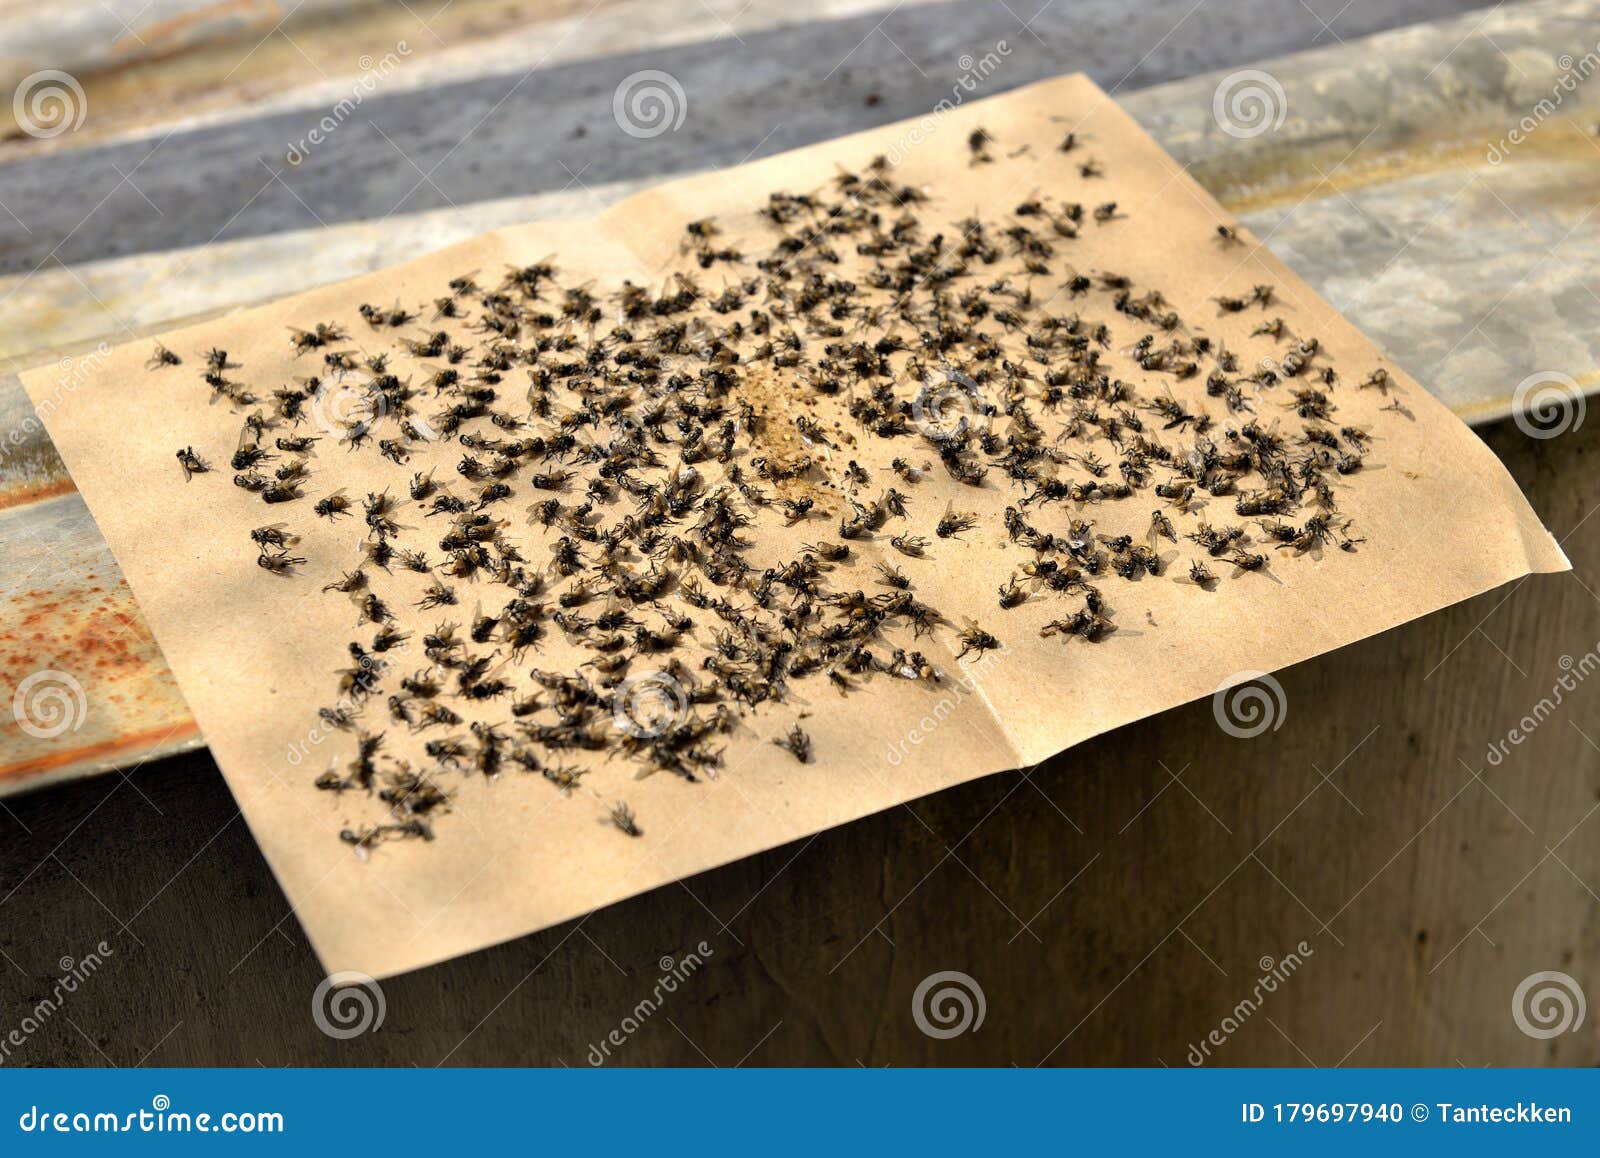 Flies Caught on Sticky Fly Paper Traps. Stock Photo - Image of brown, dead:  179697940